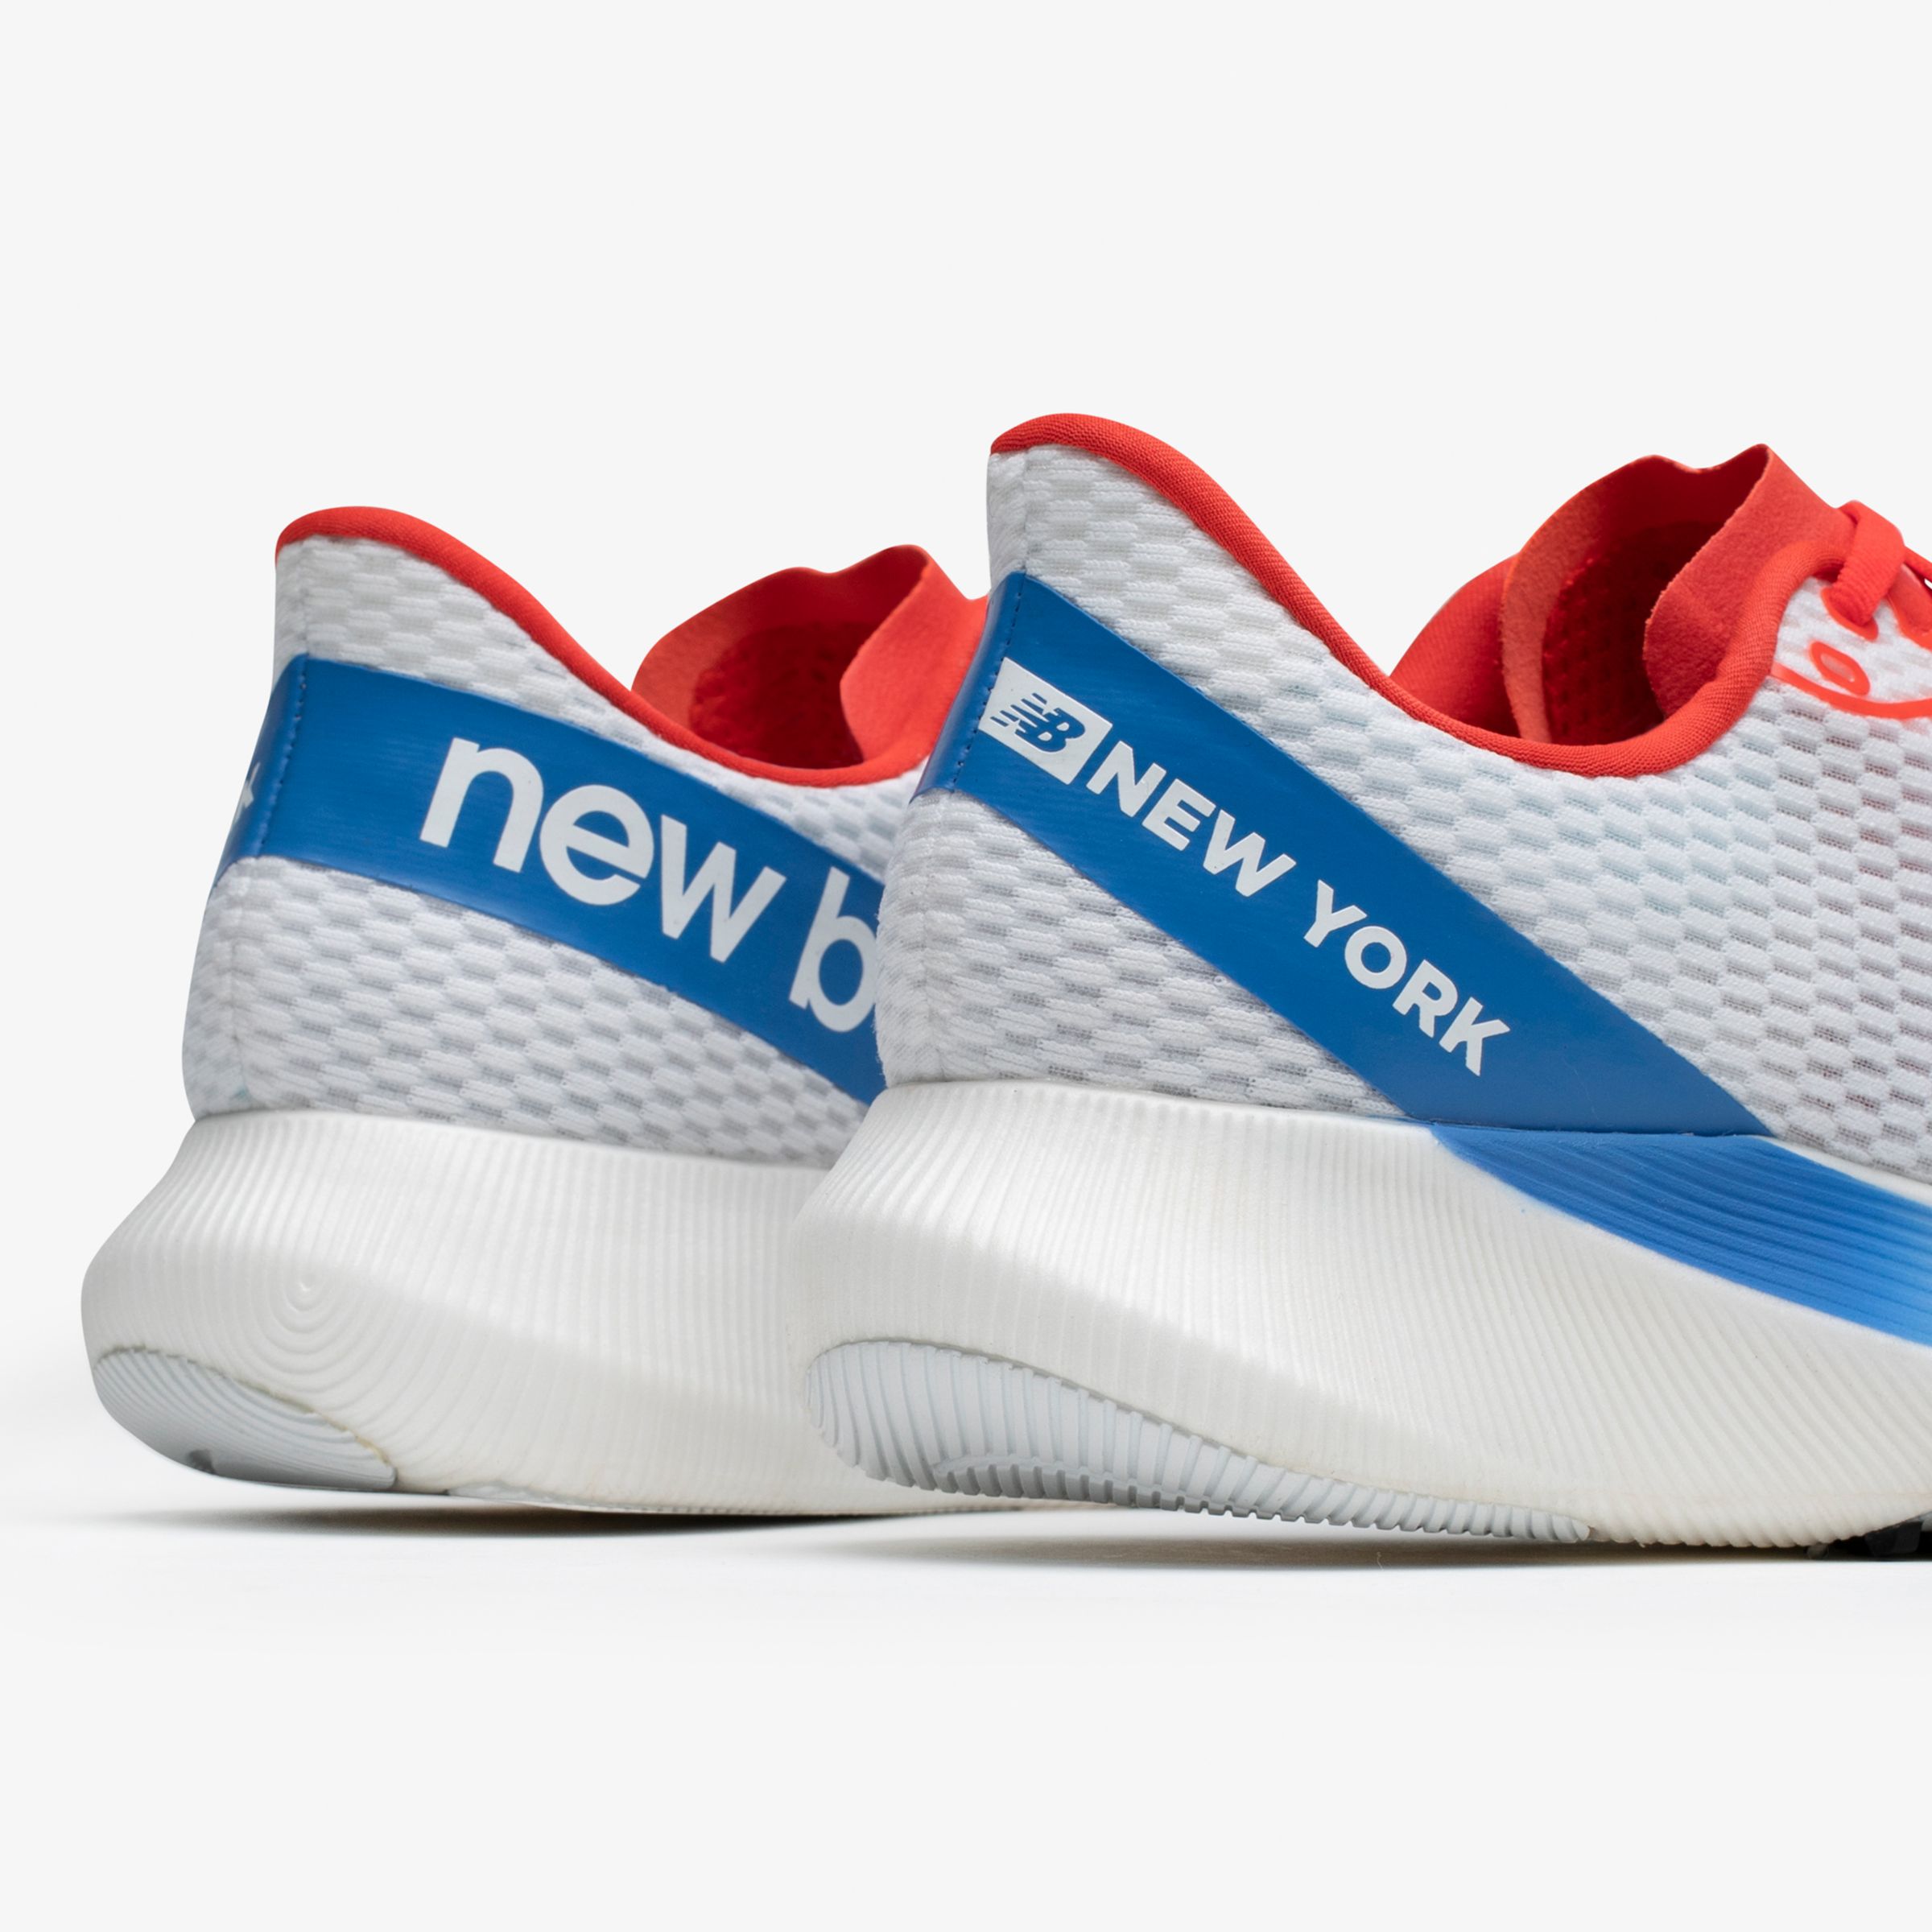 new balance fuelcell nyc